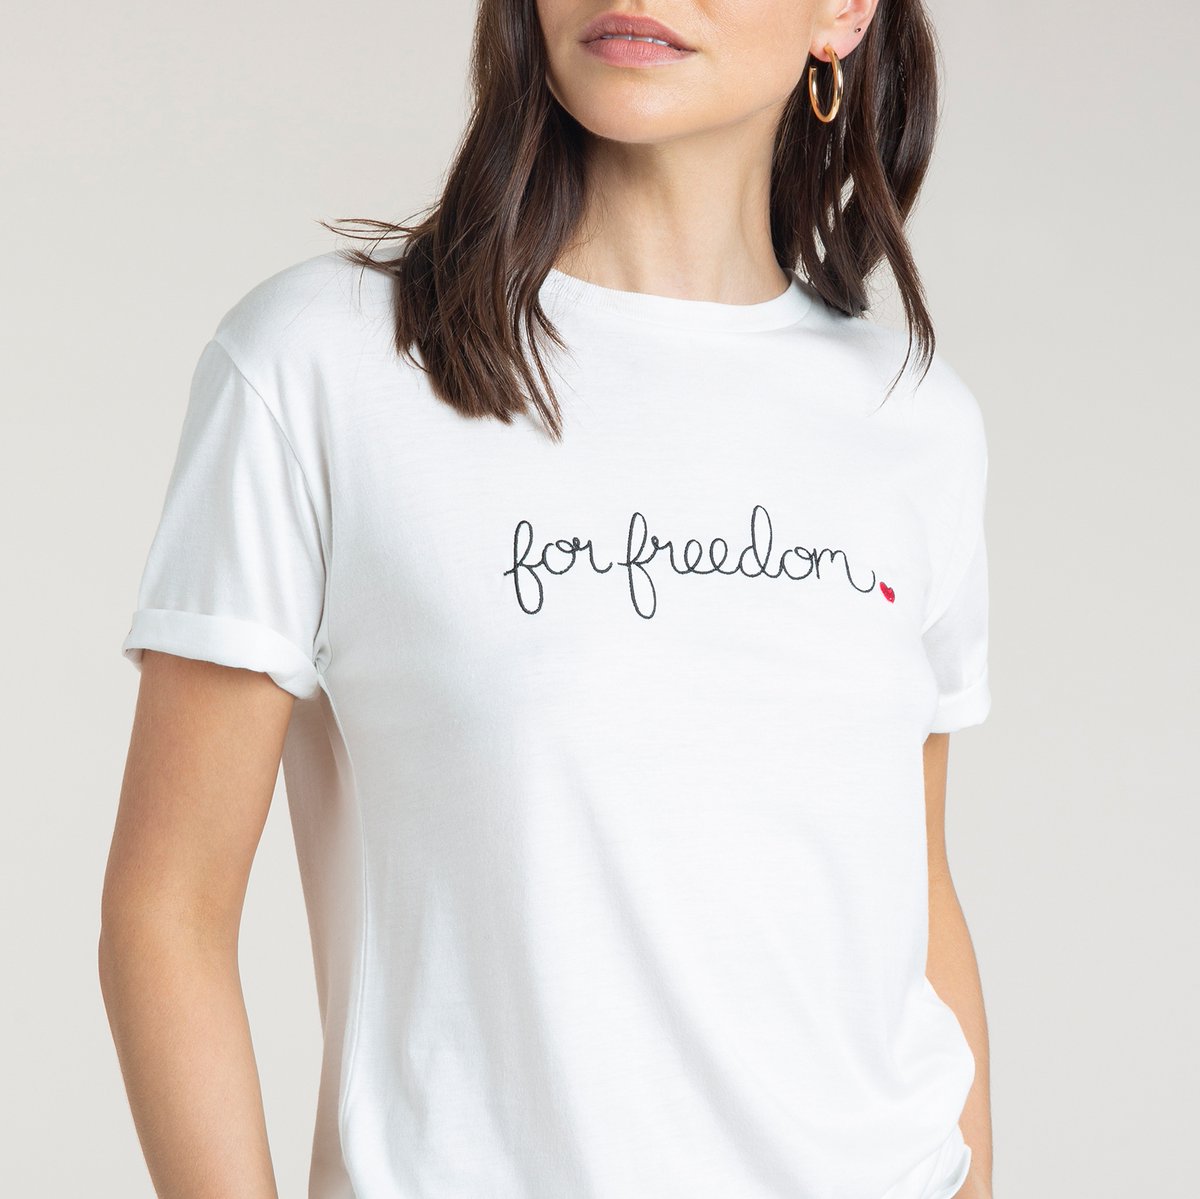 Our For Freedom T-shirt, 100% of profits are donated to @justiceandcare helping to eradicate slavery. ⁠Show your support in standing for justice and freedom. #spreadhope #forfreedom